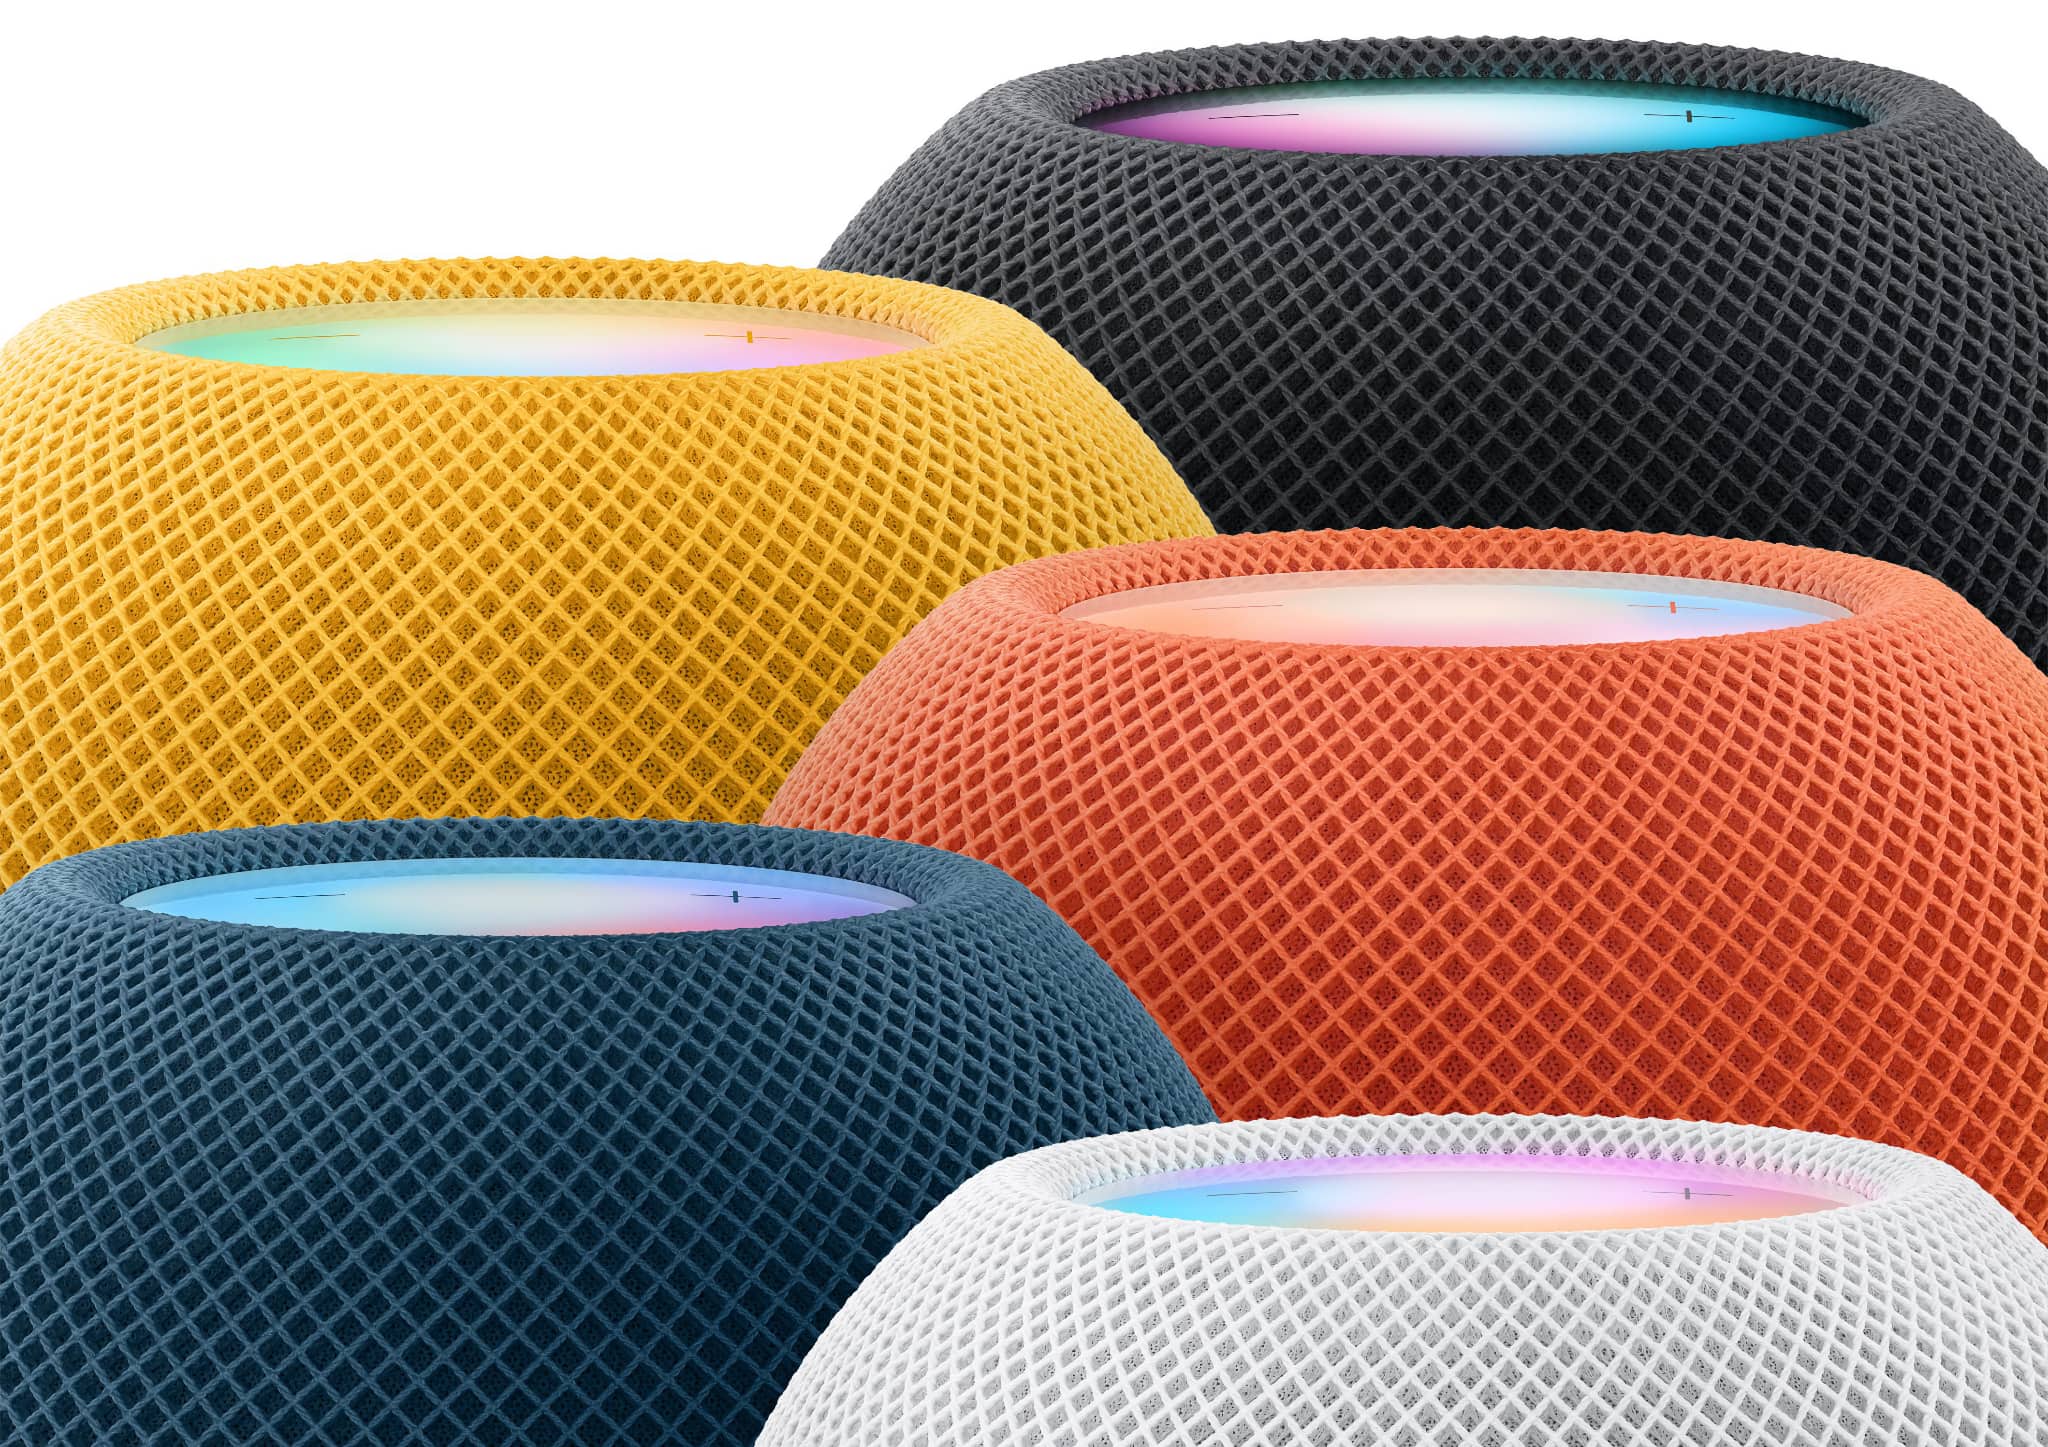 Apple's marketing image showing the upper half of the HomePod mini speakers in black, white, blue, orange and yellow